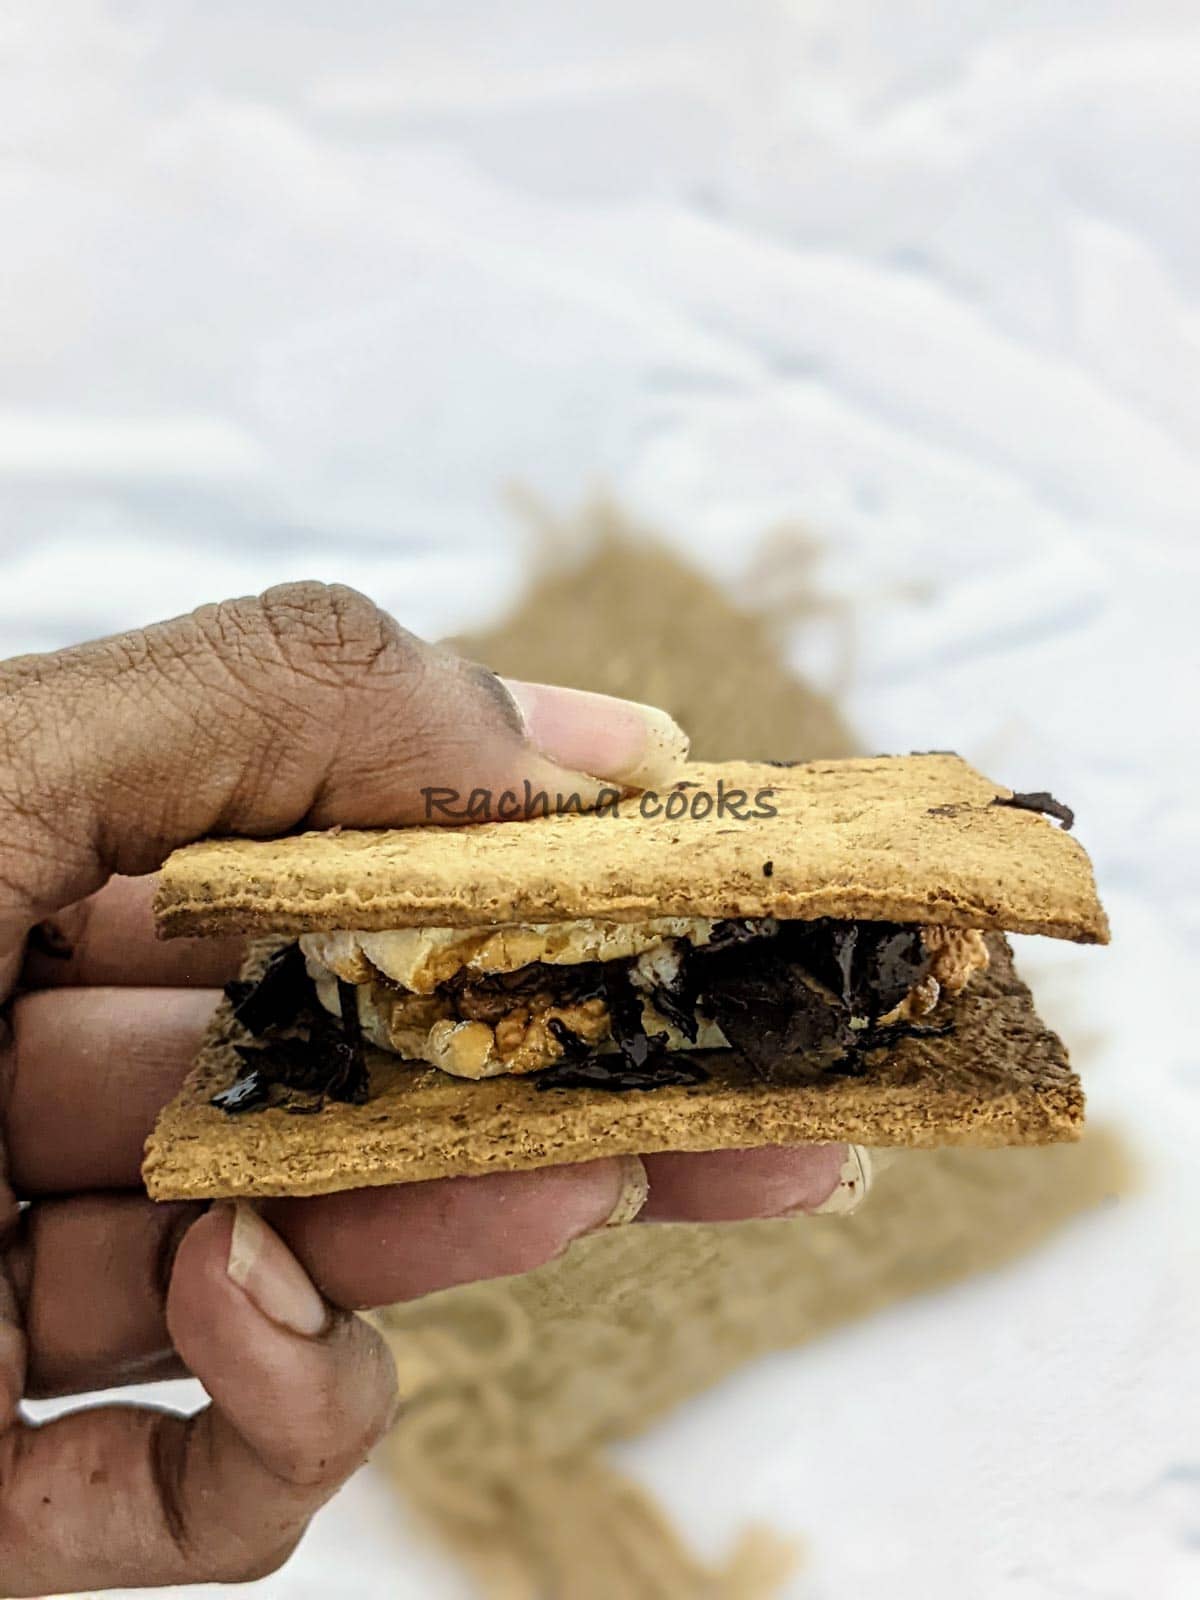 One s'more held up in hand.